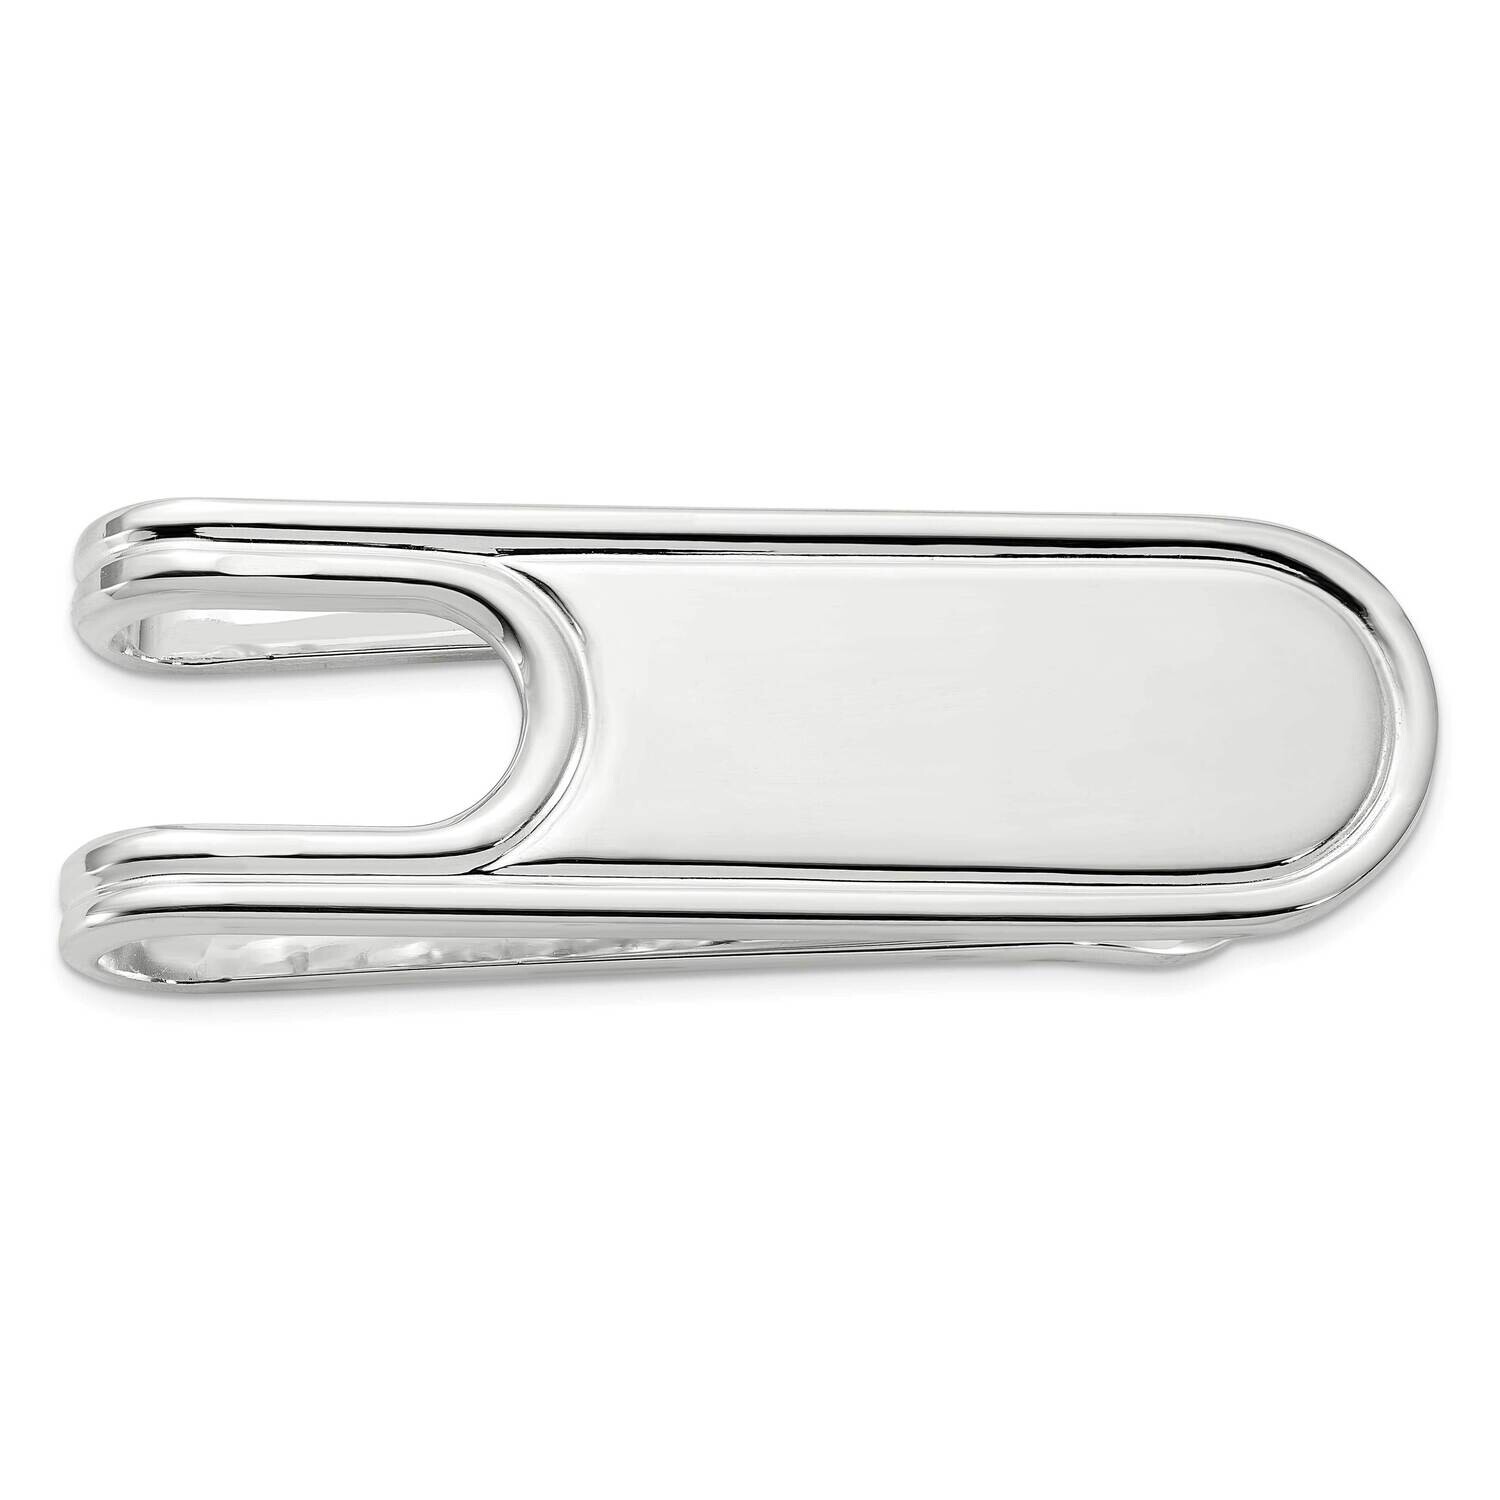 Rhod-Plated Polished Grooved Edge Open Back Money Clip Sterling Silver QQ664